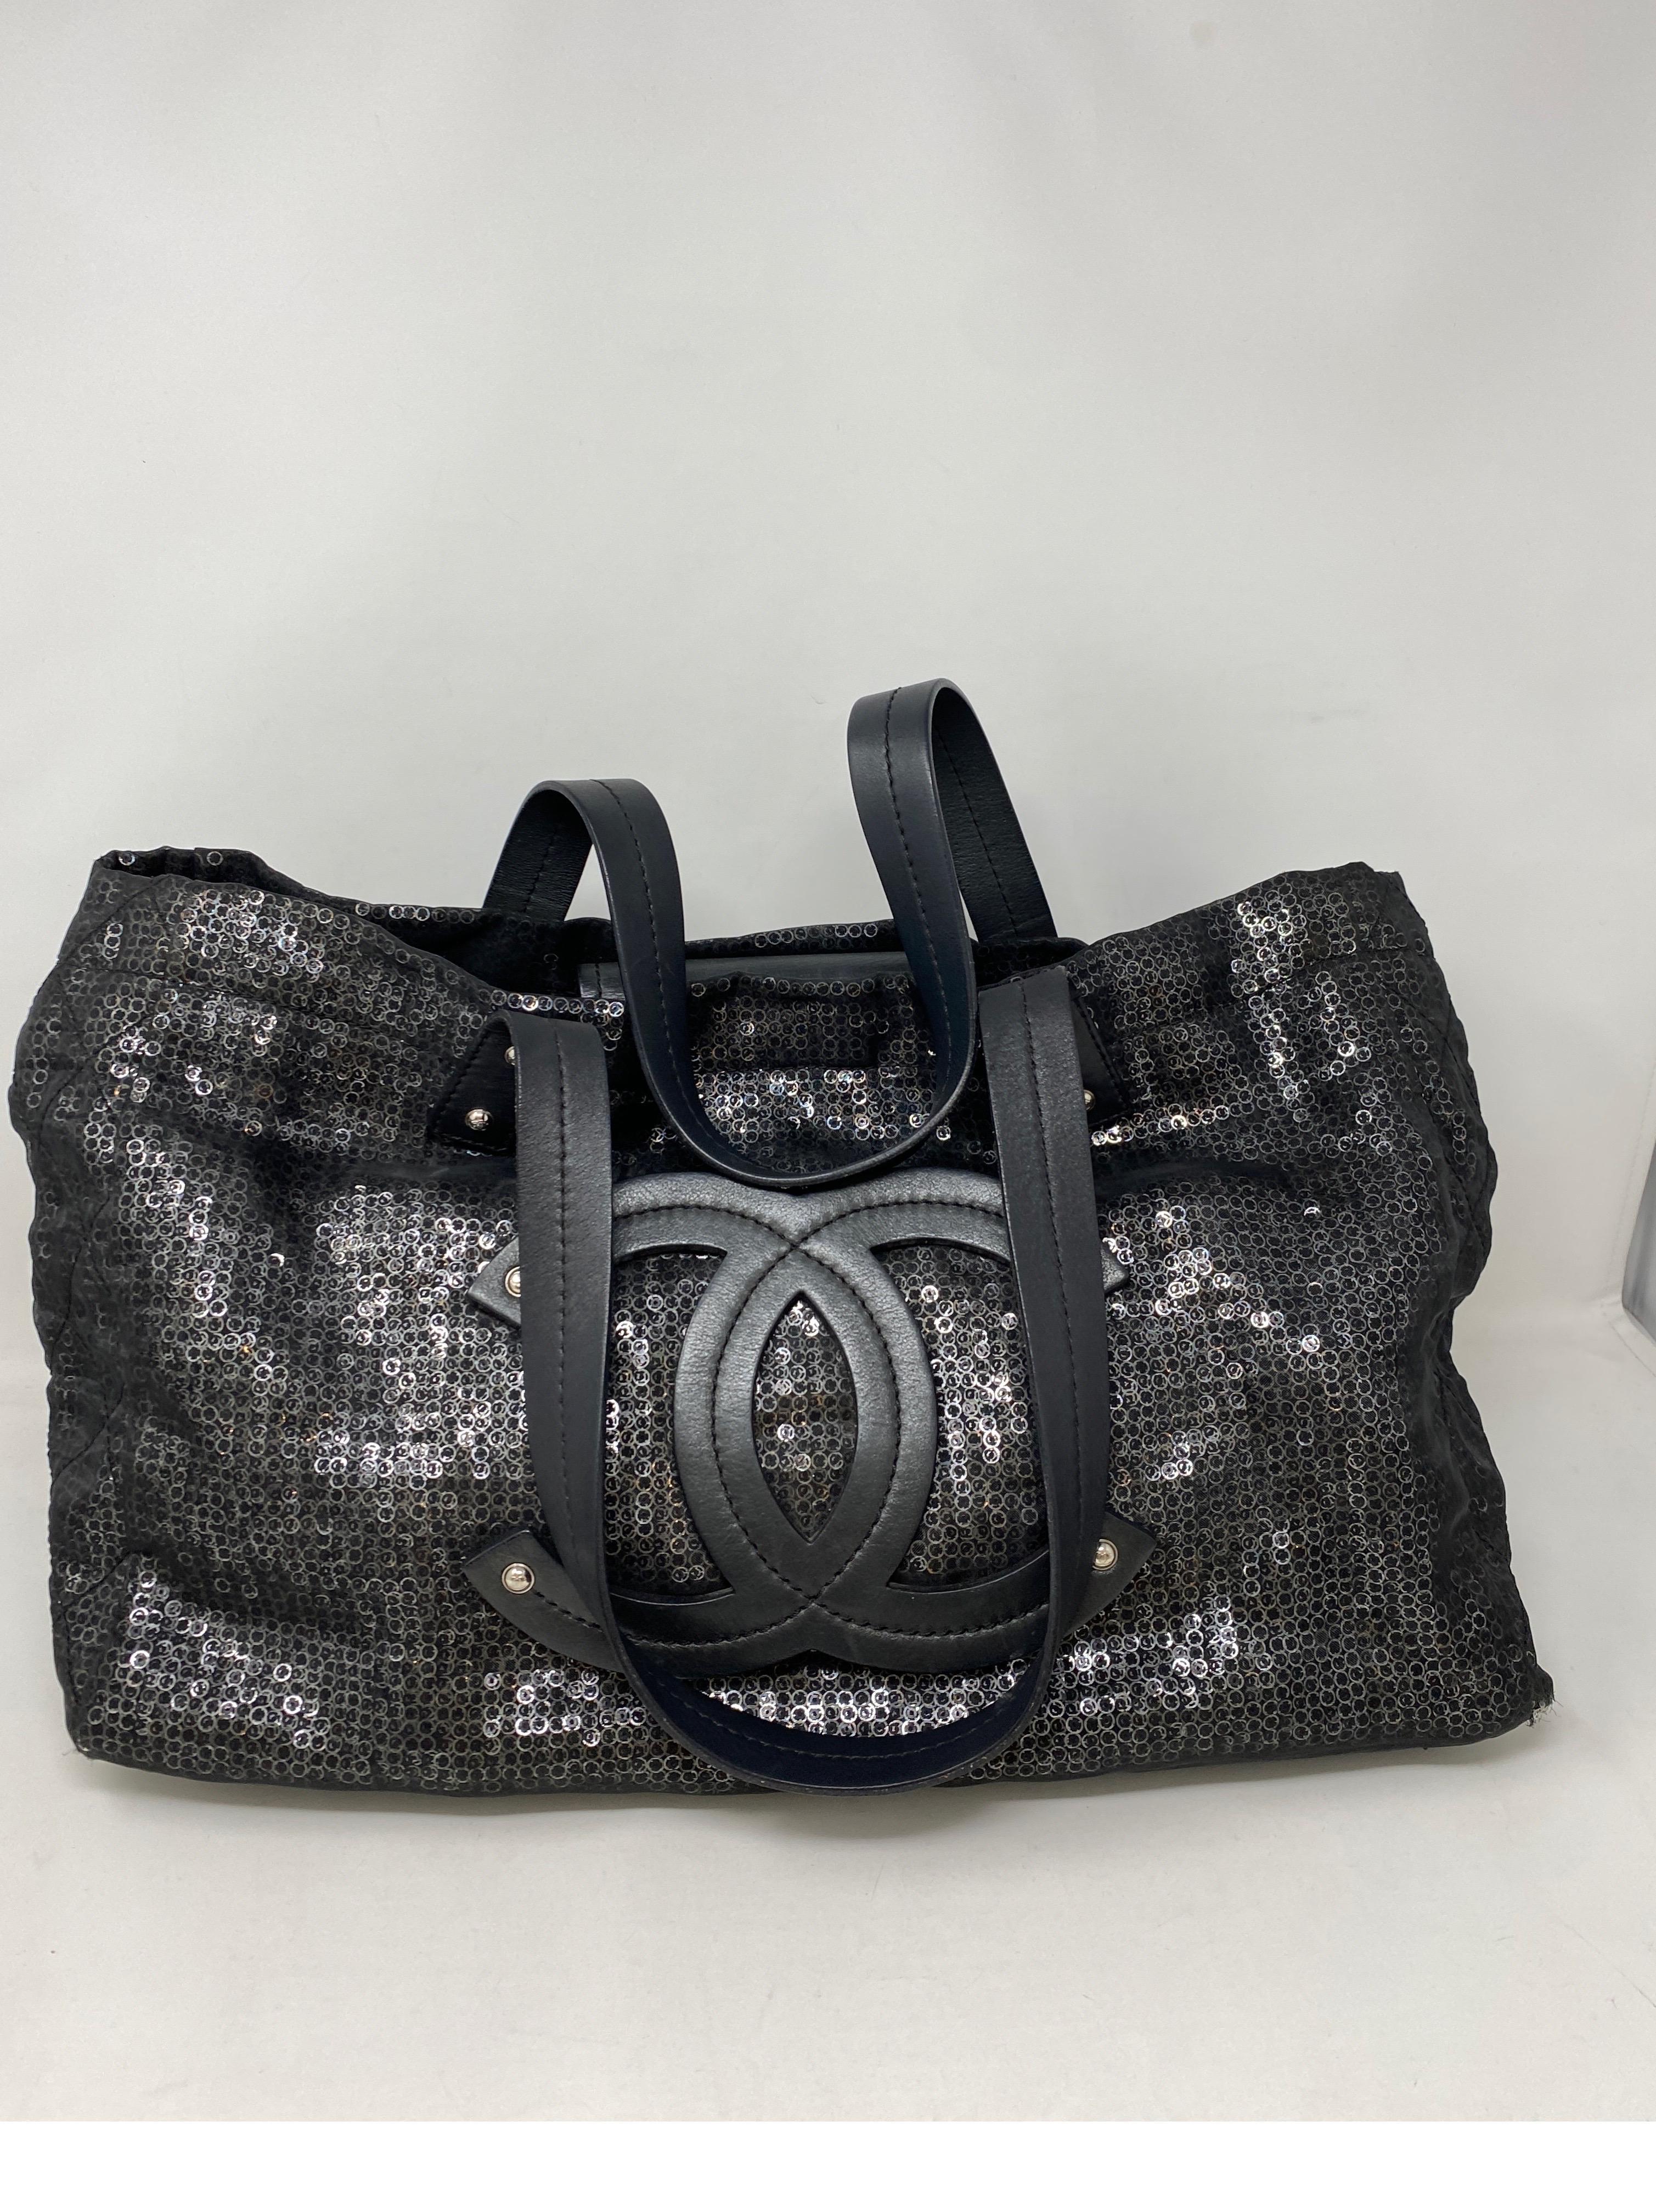 Chanel Sequin Black Tote Bag. Excellent condition. Unique style Chanel bag. Lightweight and can hold quite a bit. Guaranteed authentic. 